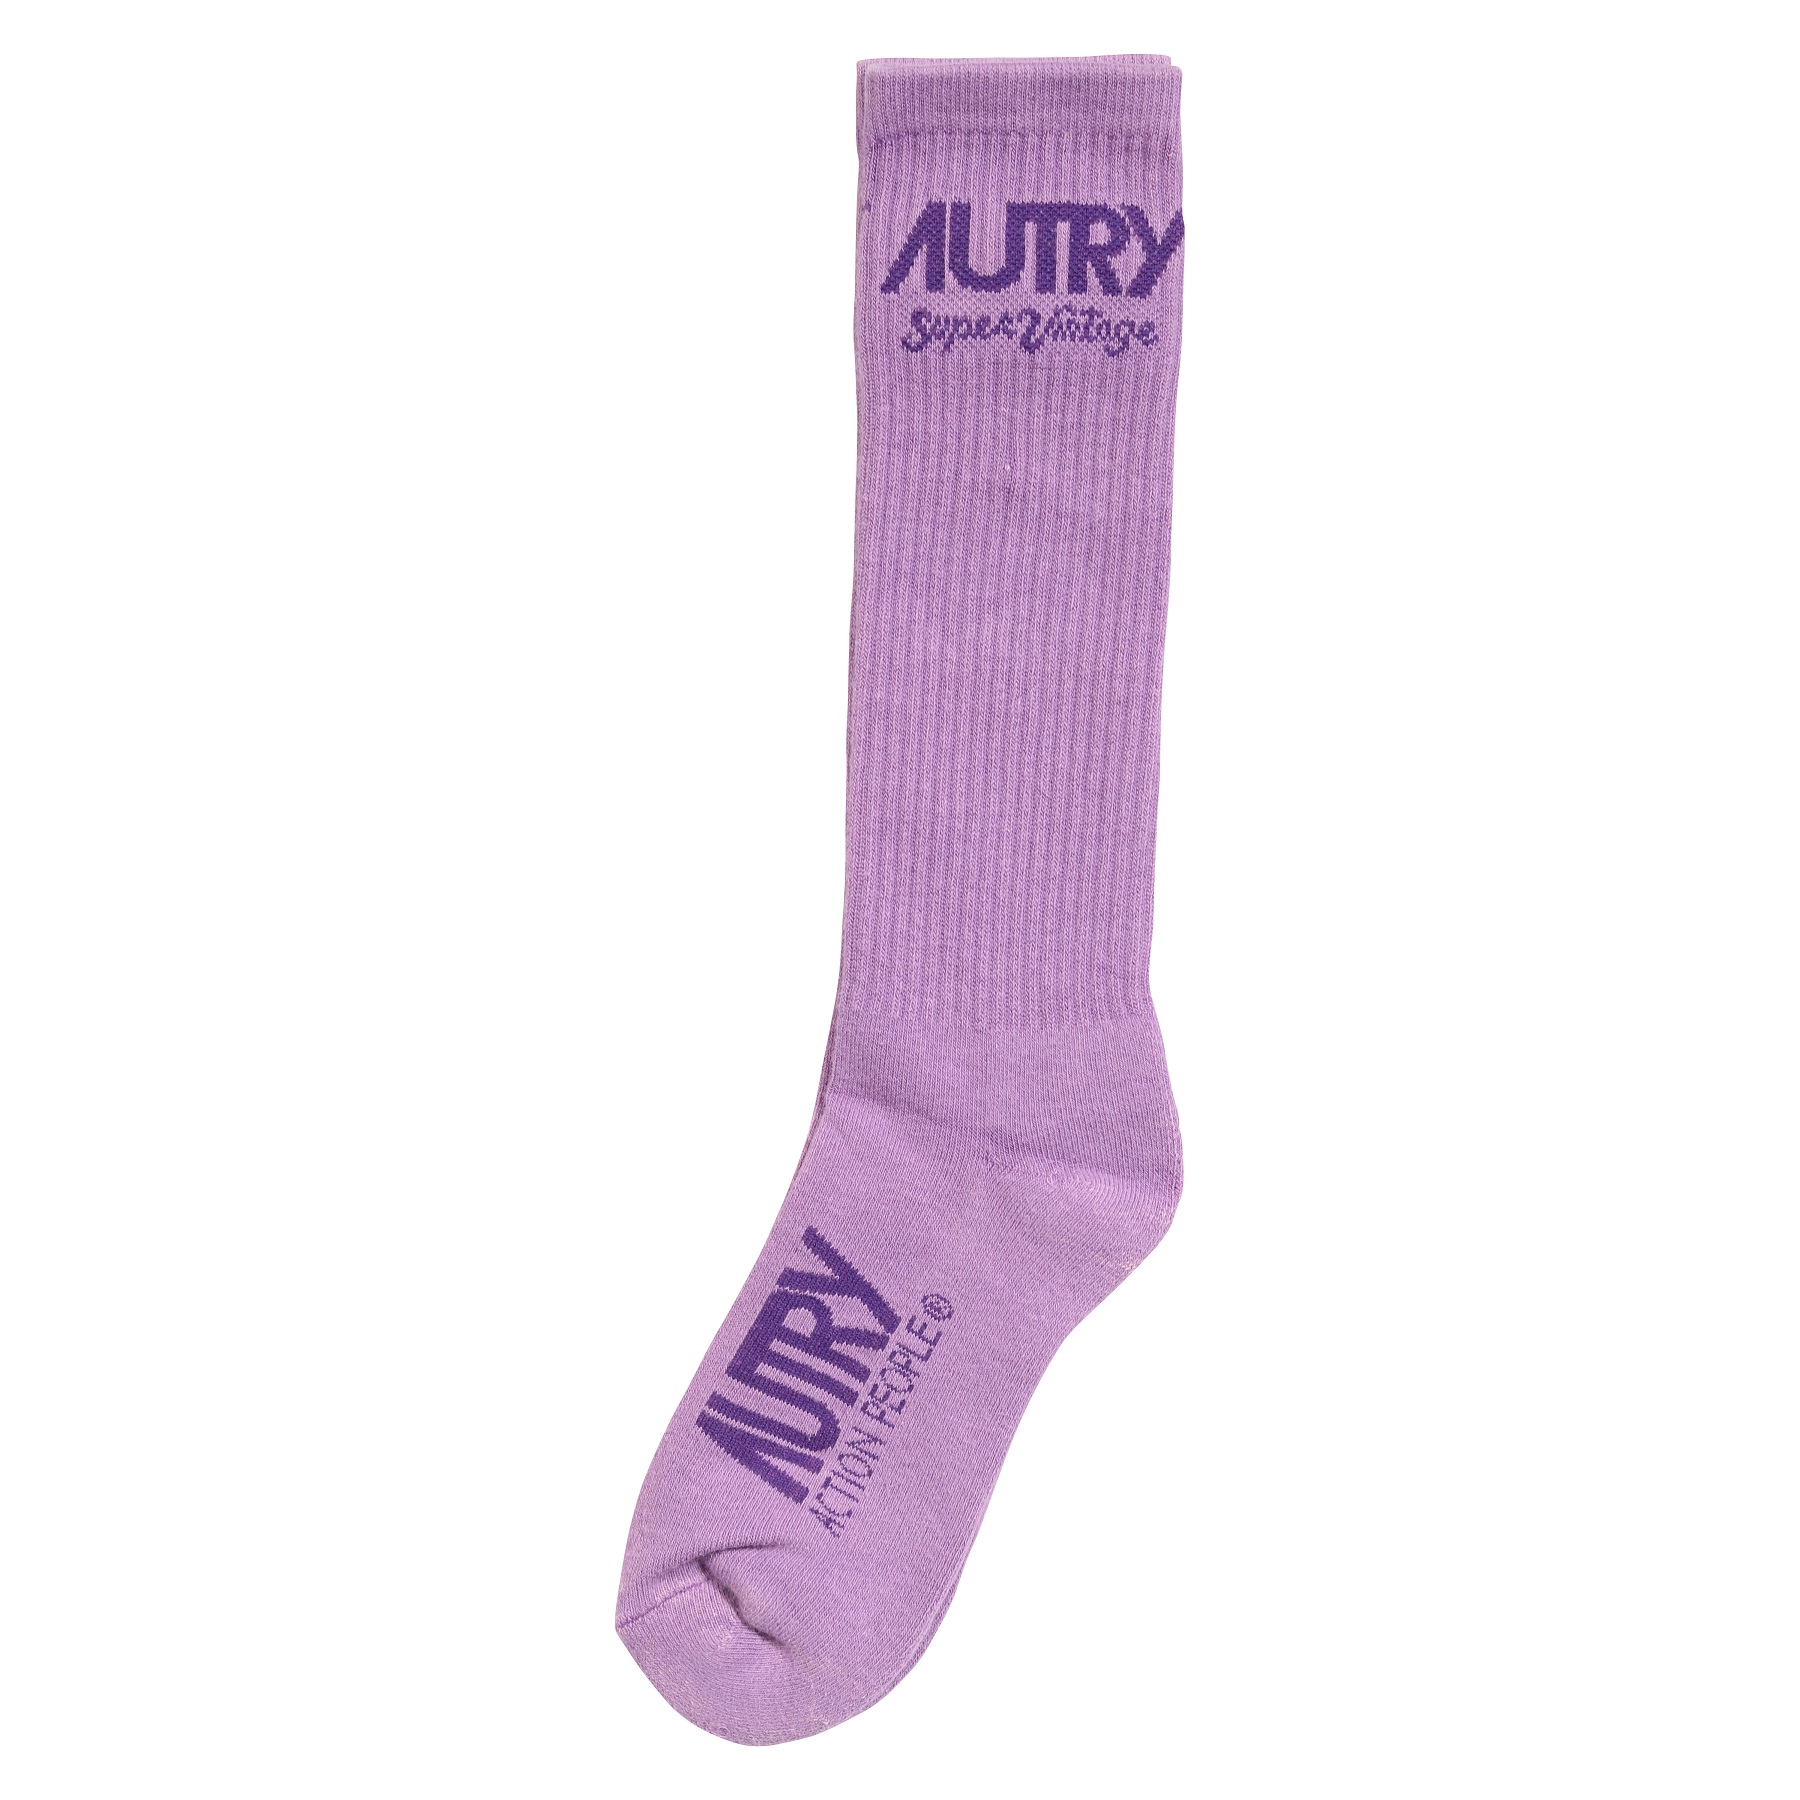 Autry Action Shoes Socks Supervintage Tinto Lilac S/35-38